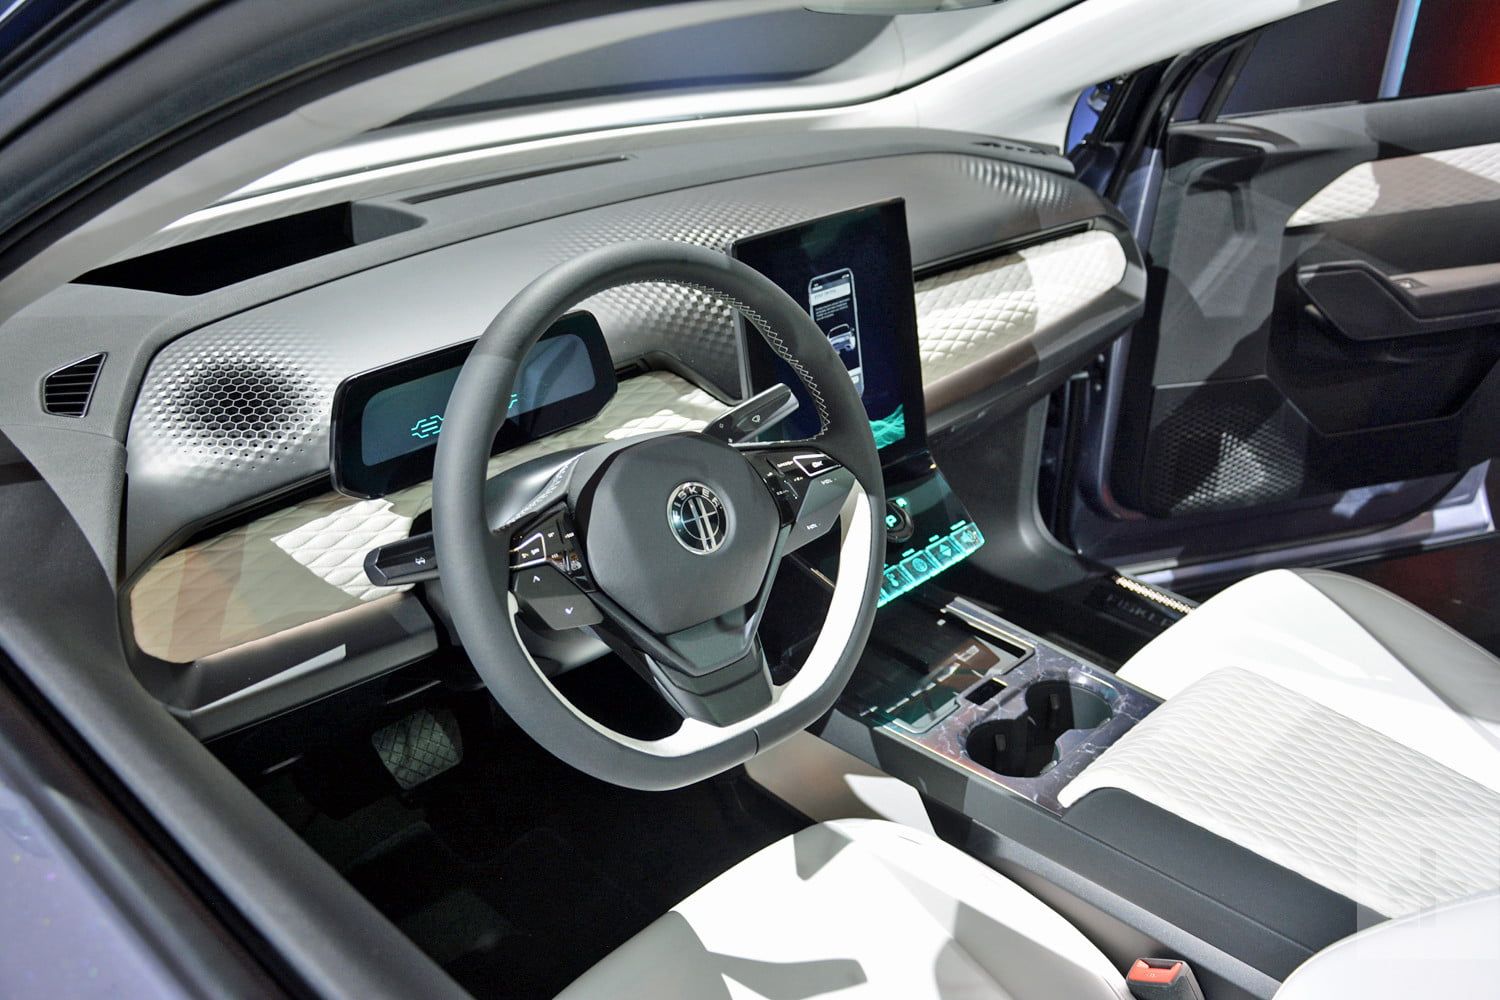 the Ocean Electric SUV  has incredible infotainment system